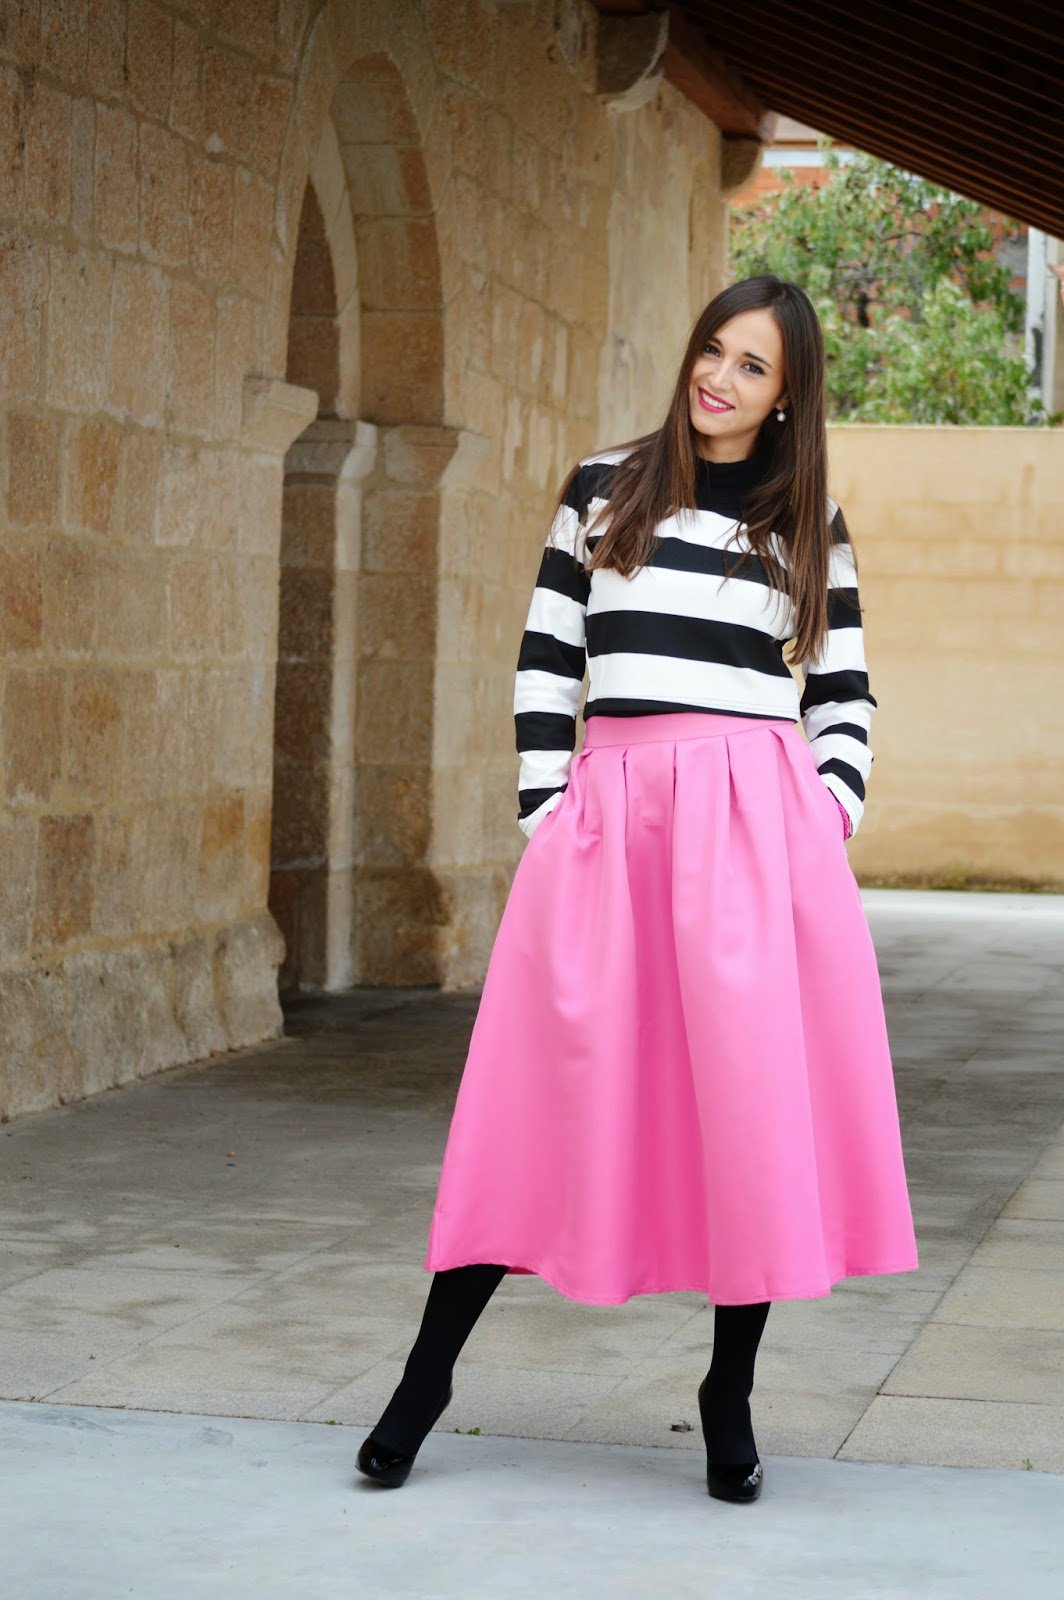 Chic Ways to Wear Your Midi Skirt During Winter - 23 Outfit Ideas